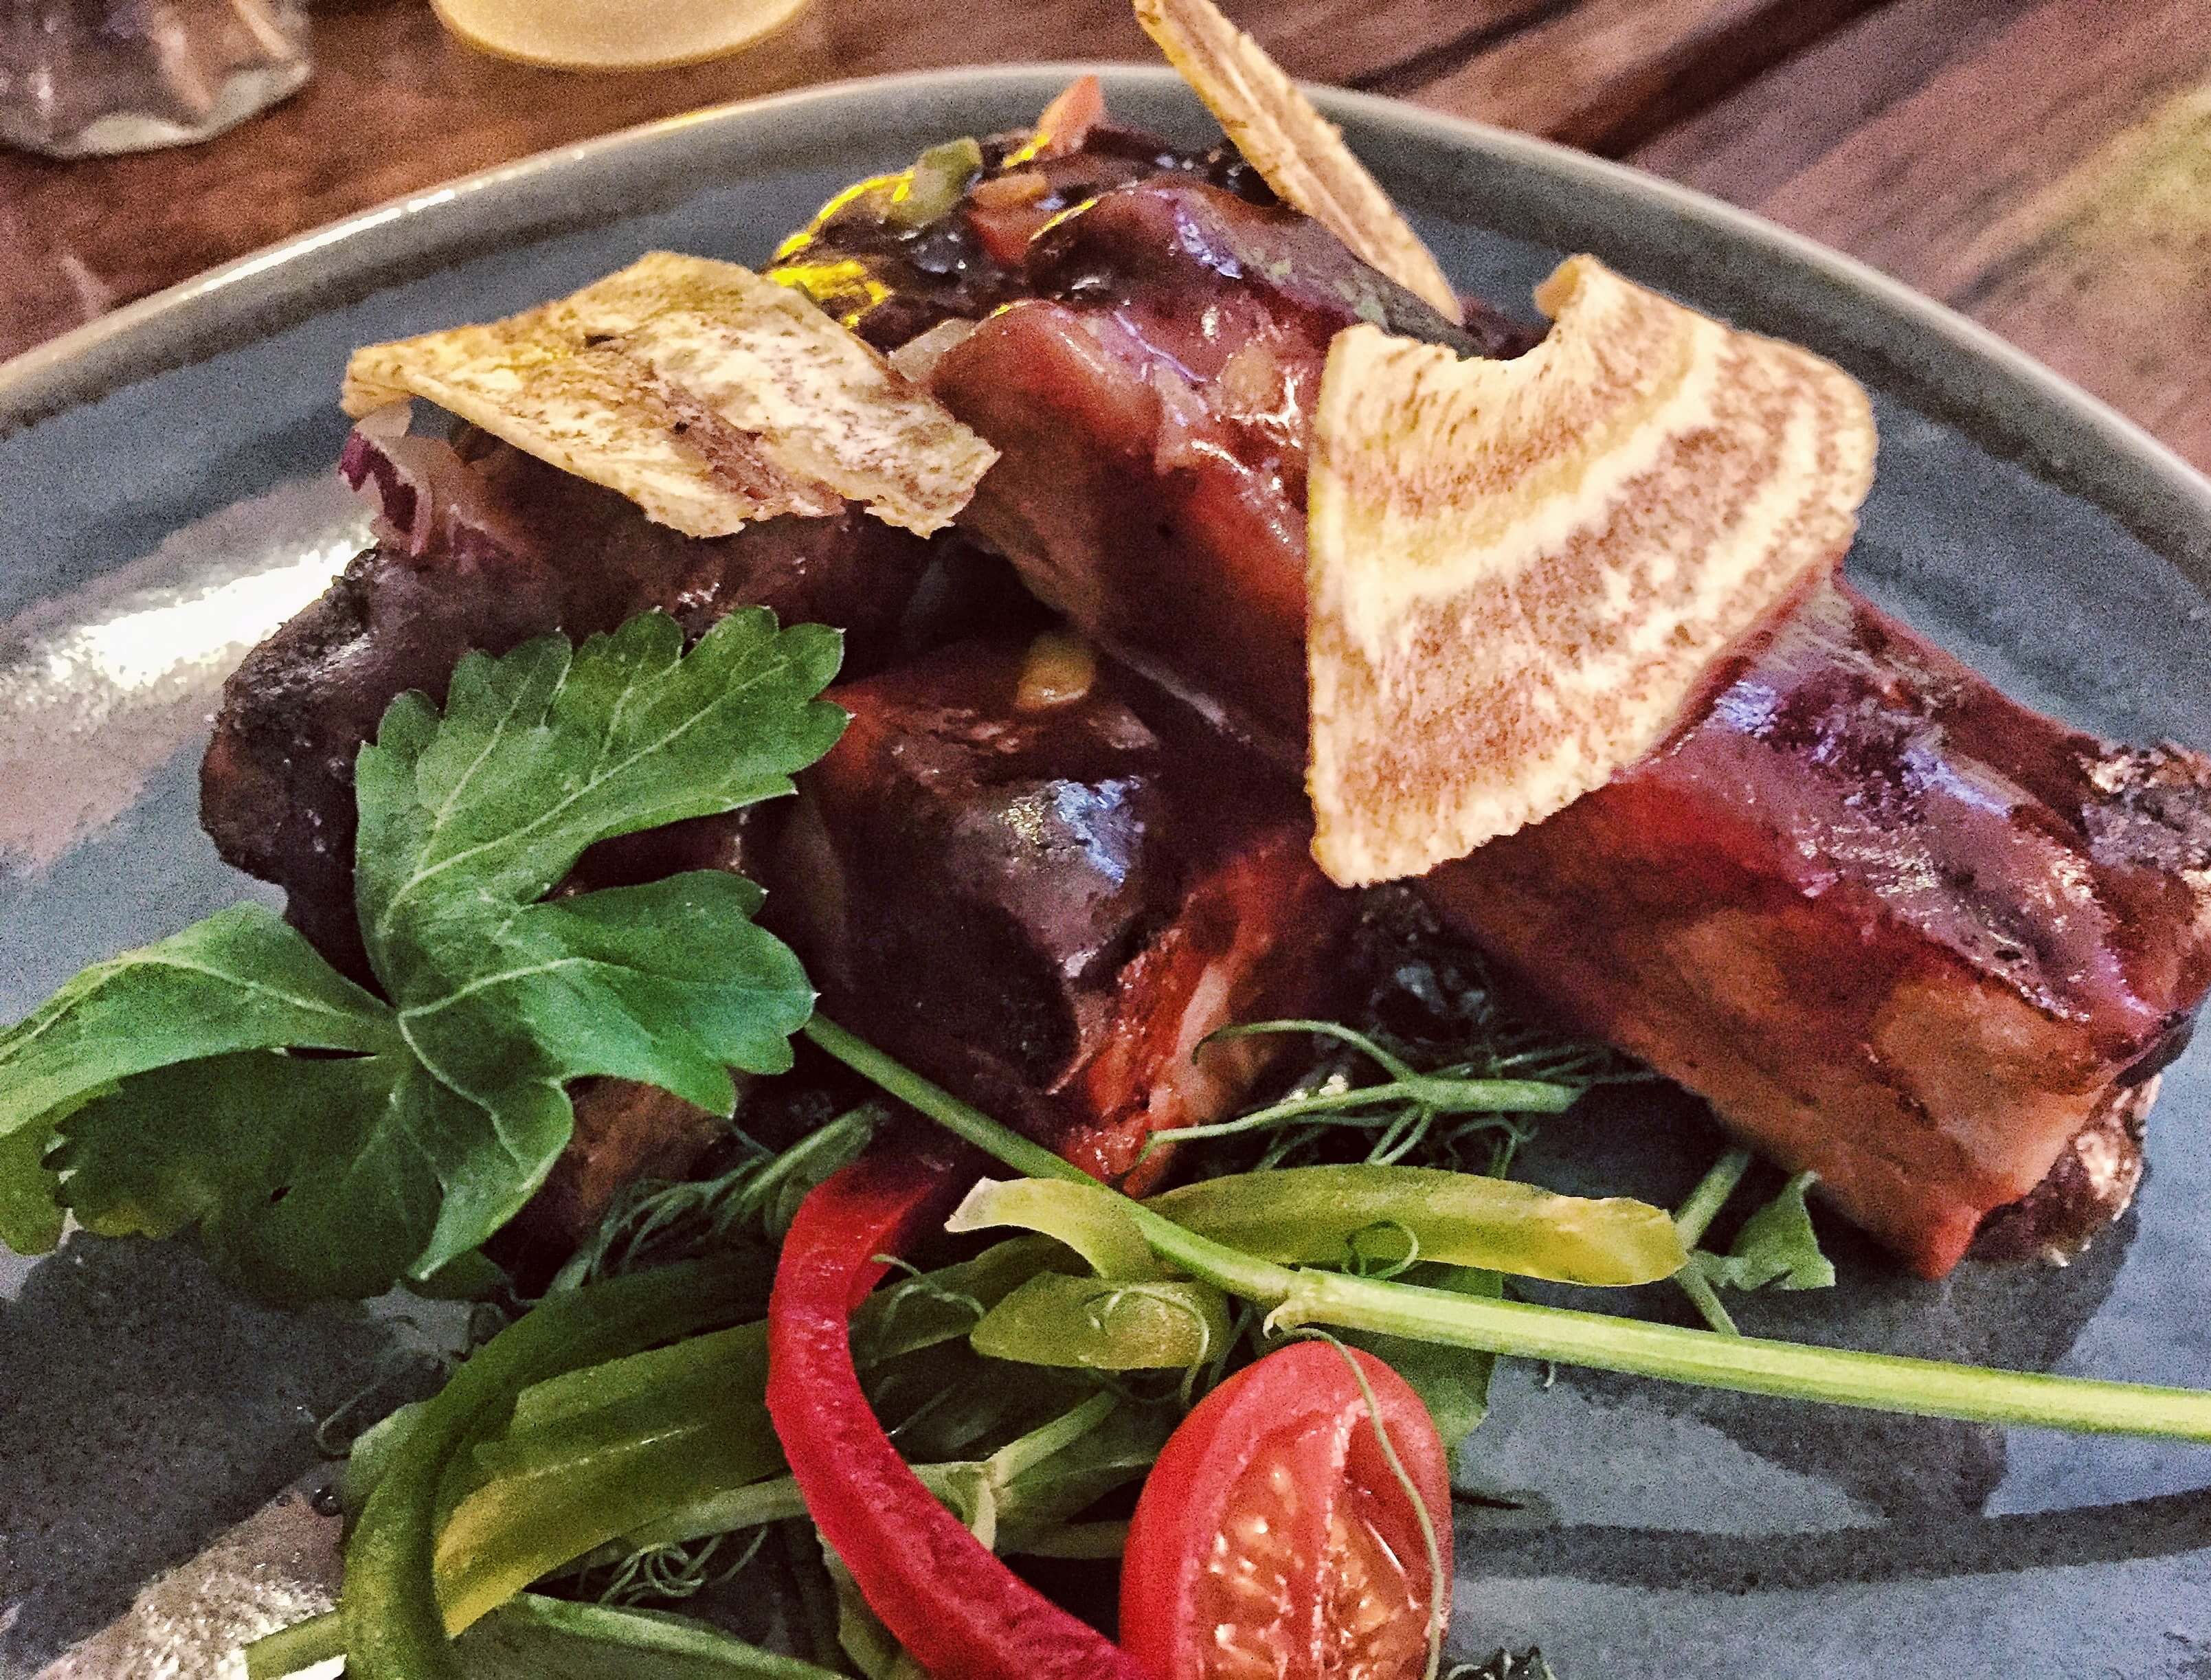 Sticky jerk pork ribs with fried plantain crisps at Cottons Caribbean restaurant in Shoreditch, London